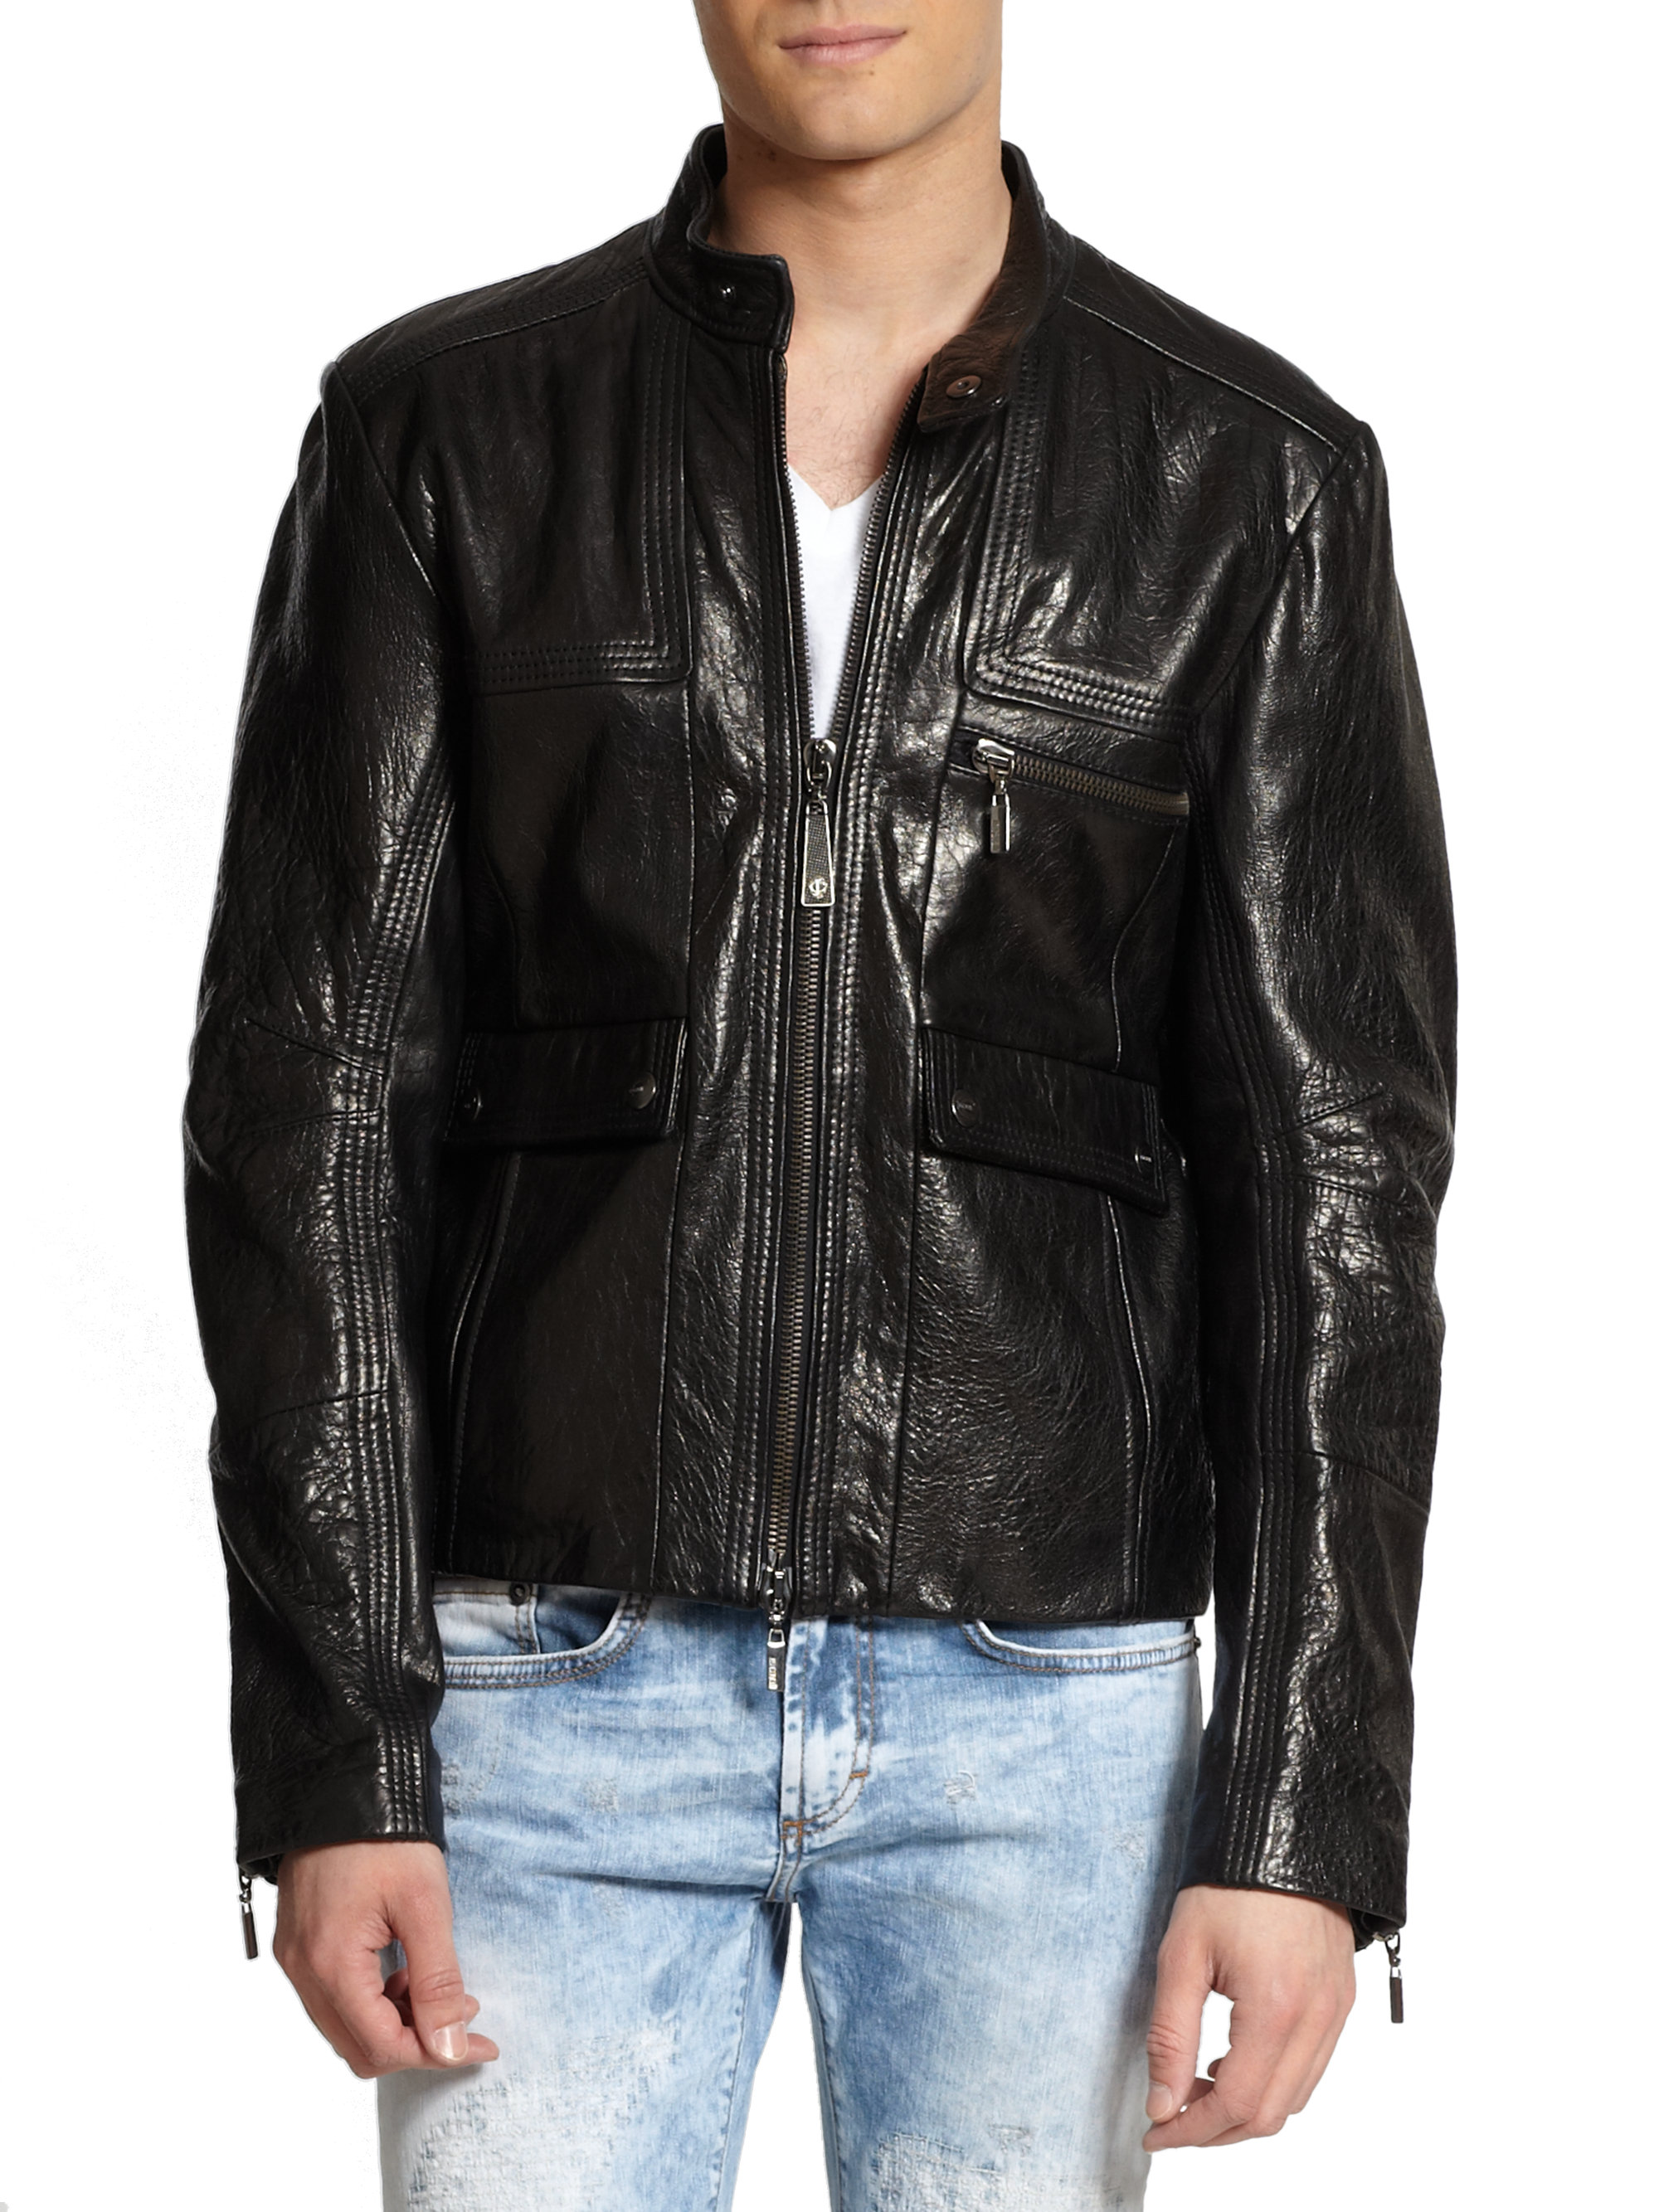 Lyst - Just cavalli Pebbled Leather Zipfront Jacket in Black for Men